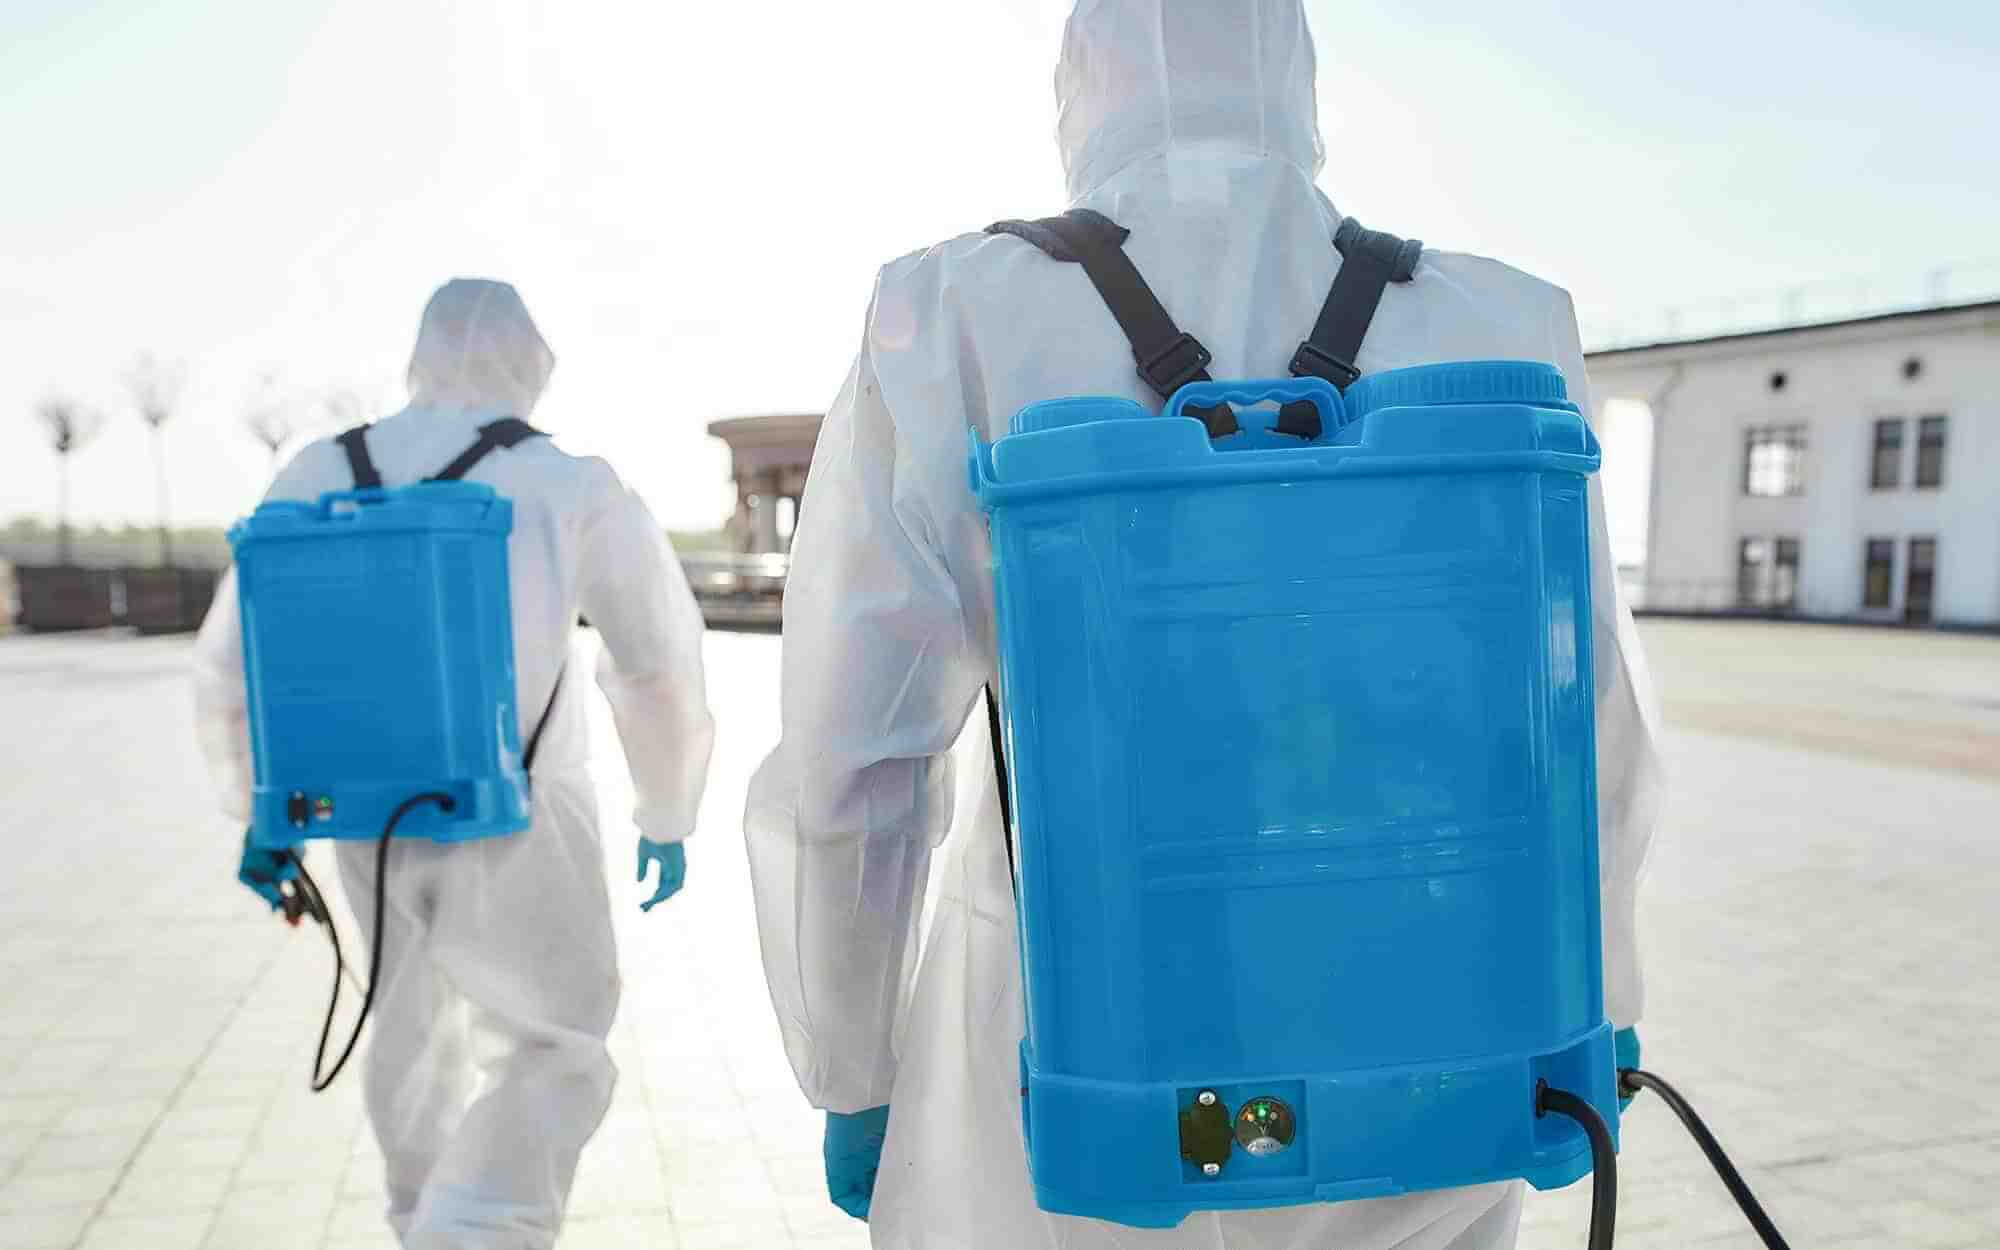 Specialized team in protective suits and masks with backpack of pressurized spray disinfectant